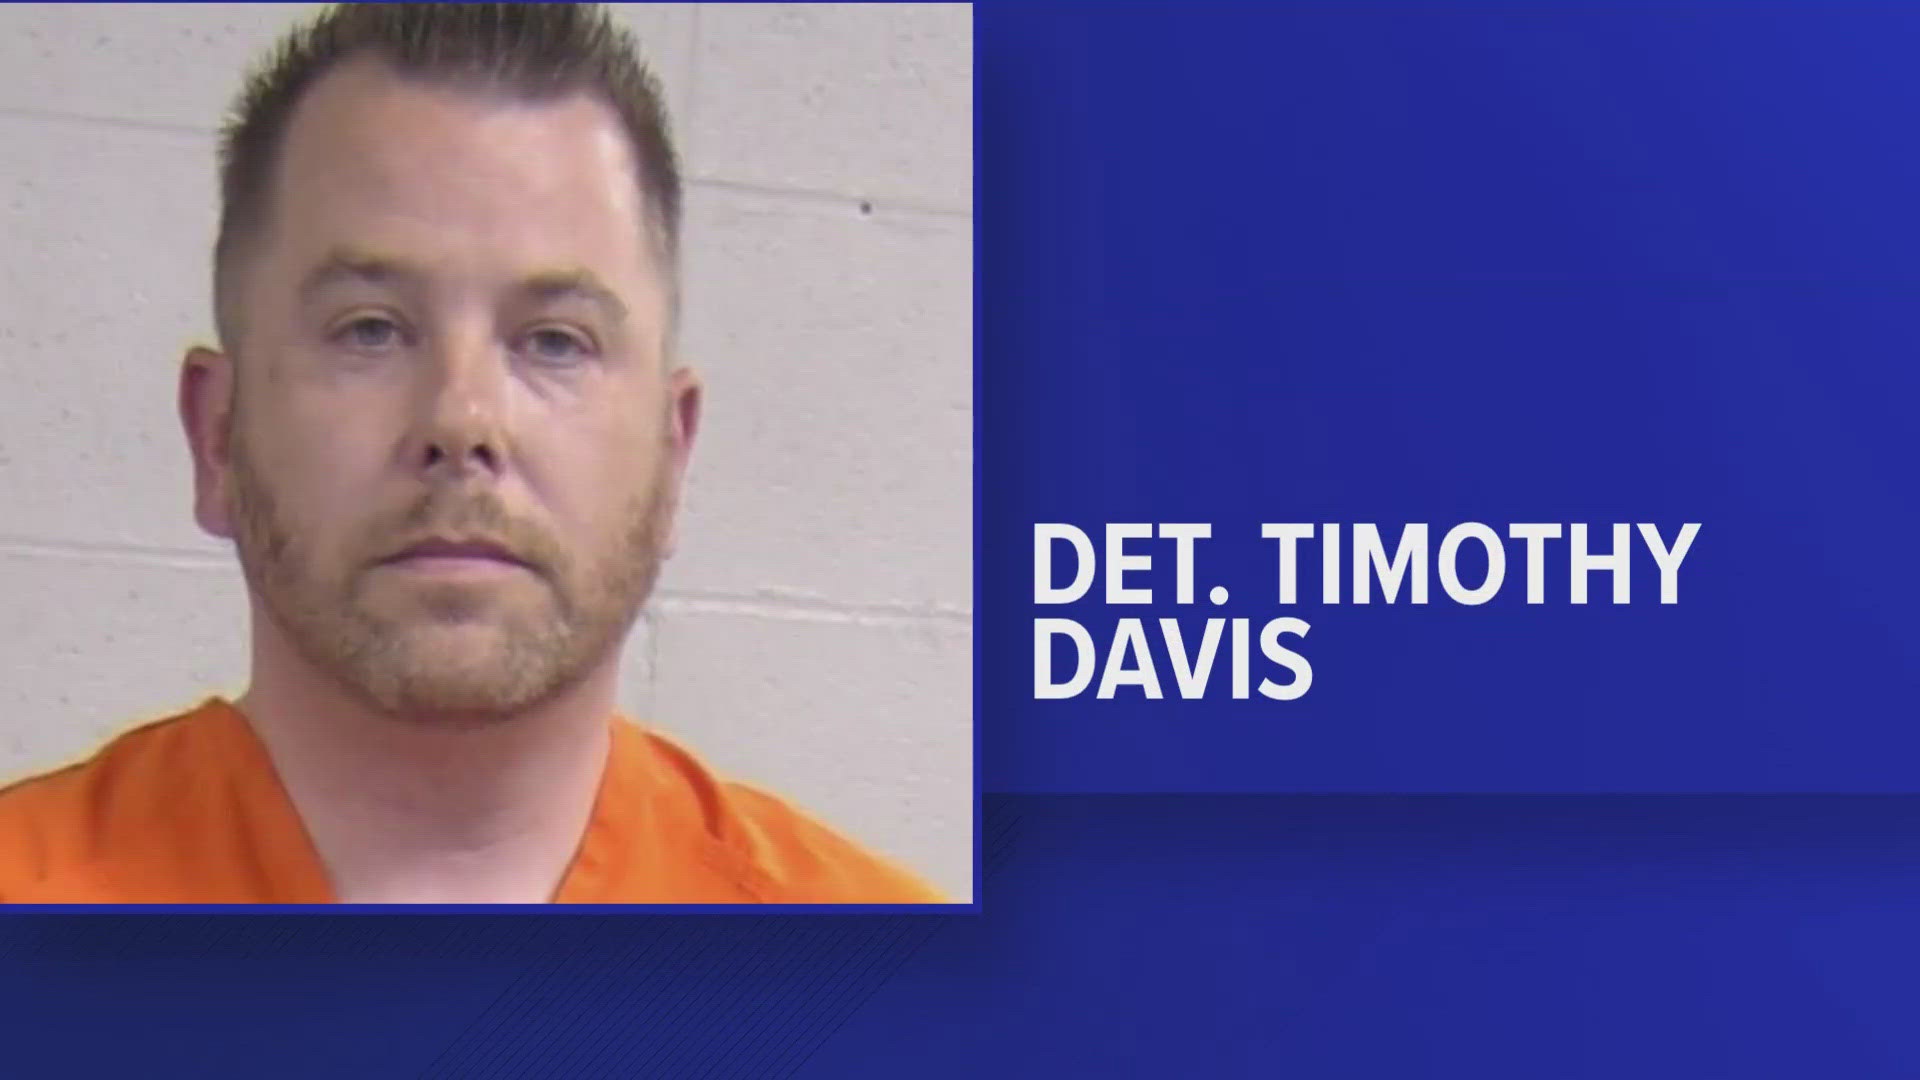 A single-vehicle crash in Mount Washington in mid-May led to the arrest of Det. Timothy Davis' on Tuesday.